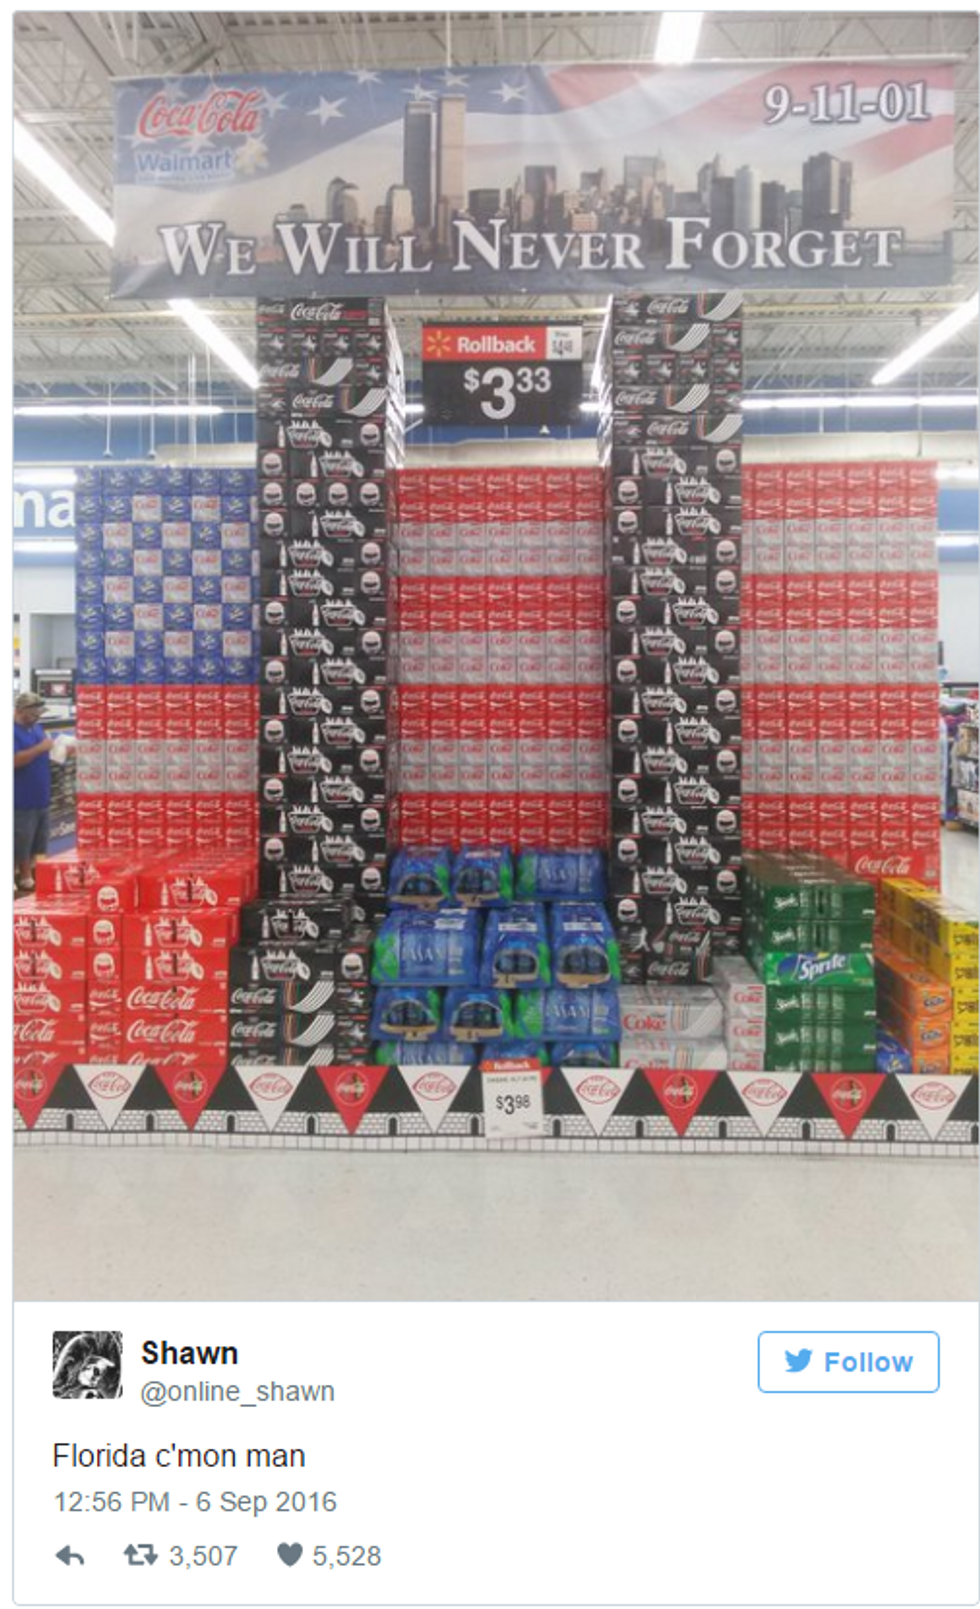 Walmart And Coca Cola Team Up For 2016's Best 9/11 Tribute!